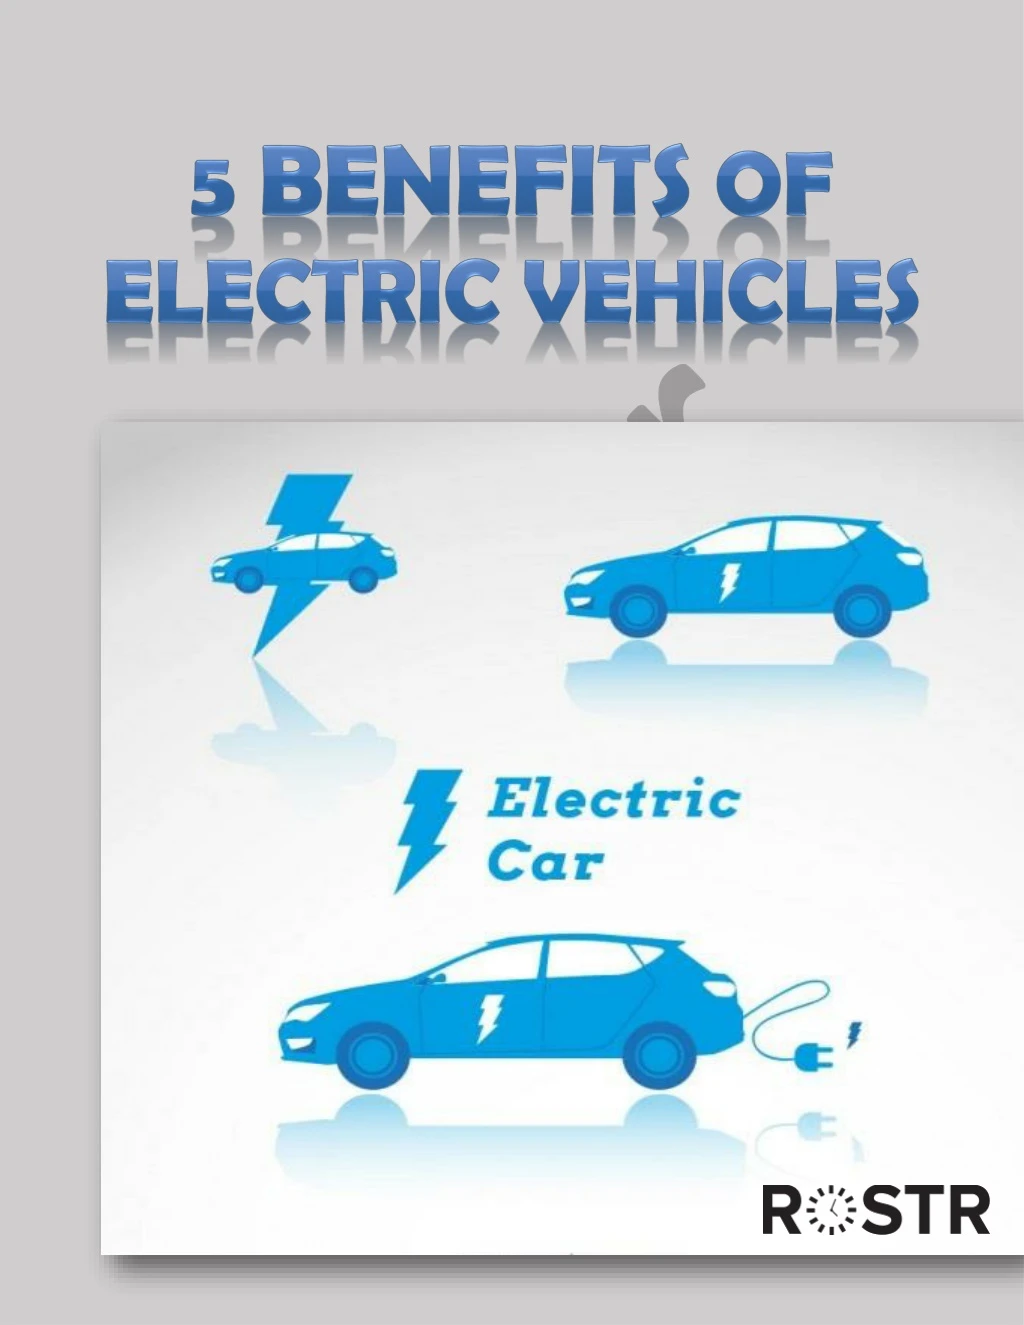 5 benefits of electric vehicles